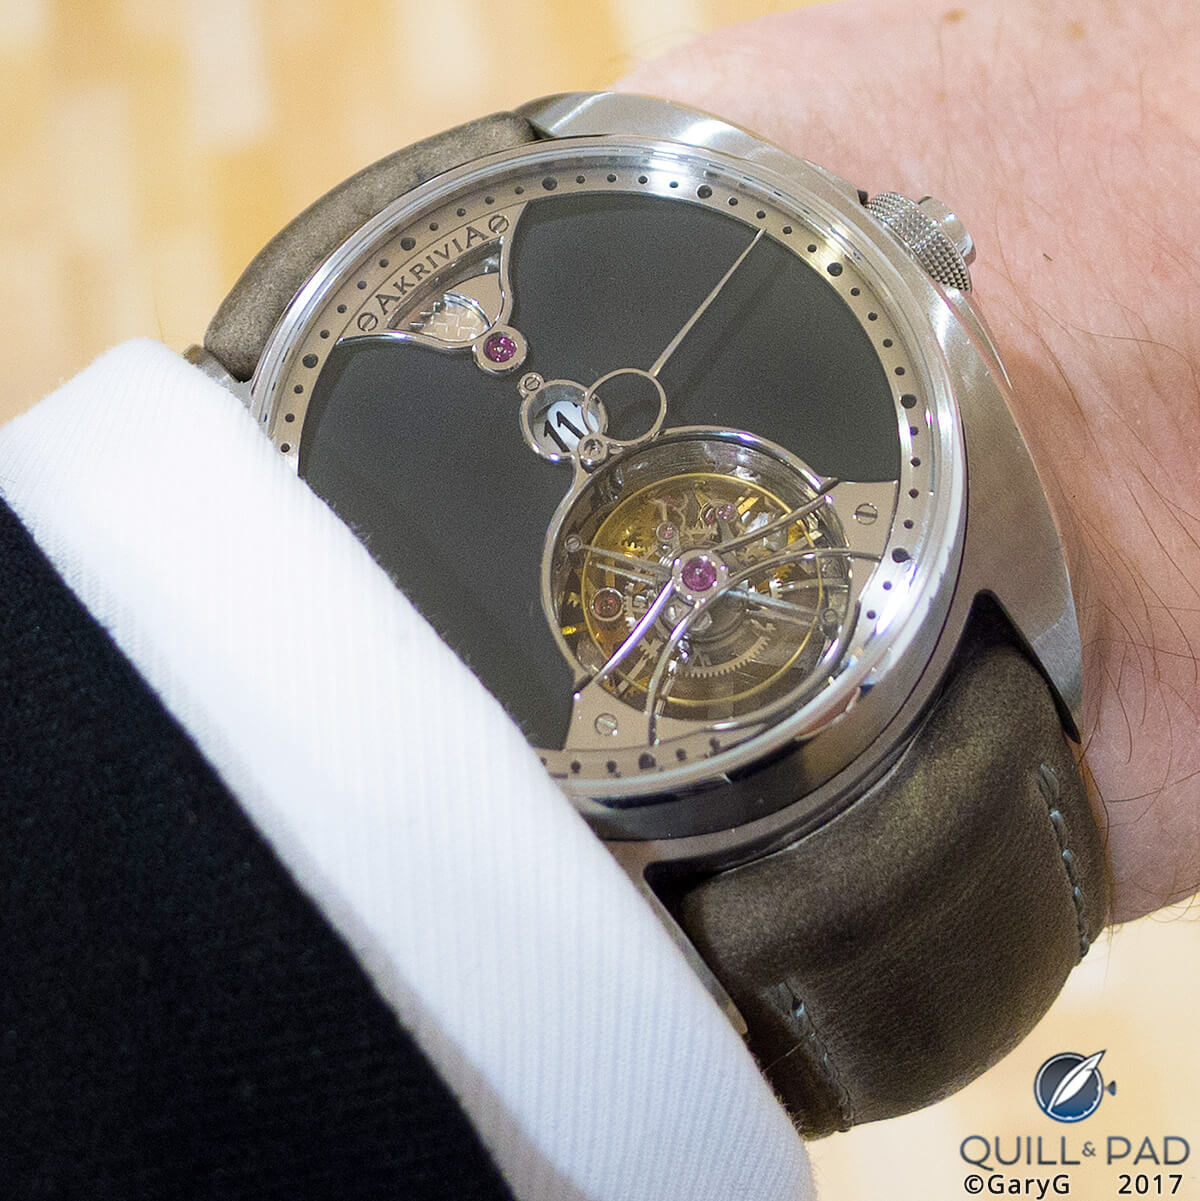 Tourbillon Chiming Jump Hour from Akrivia on the author’s wrist